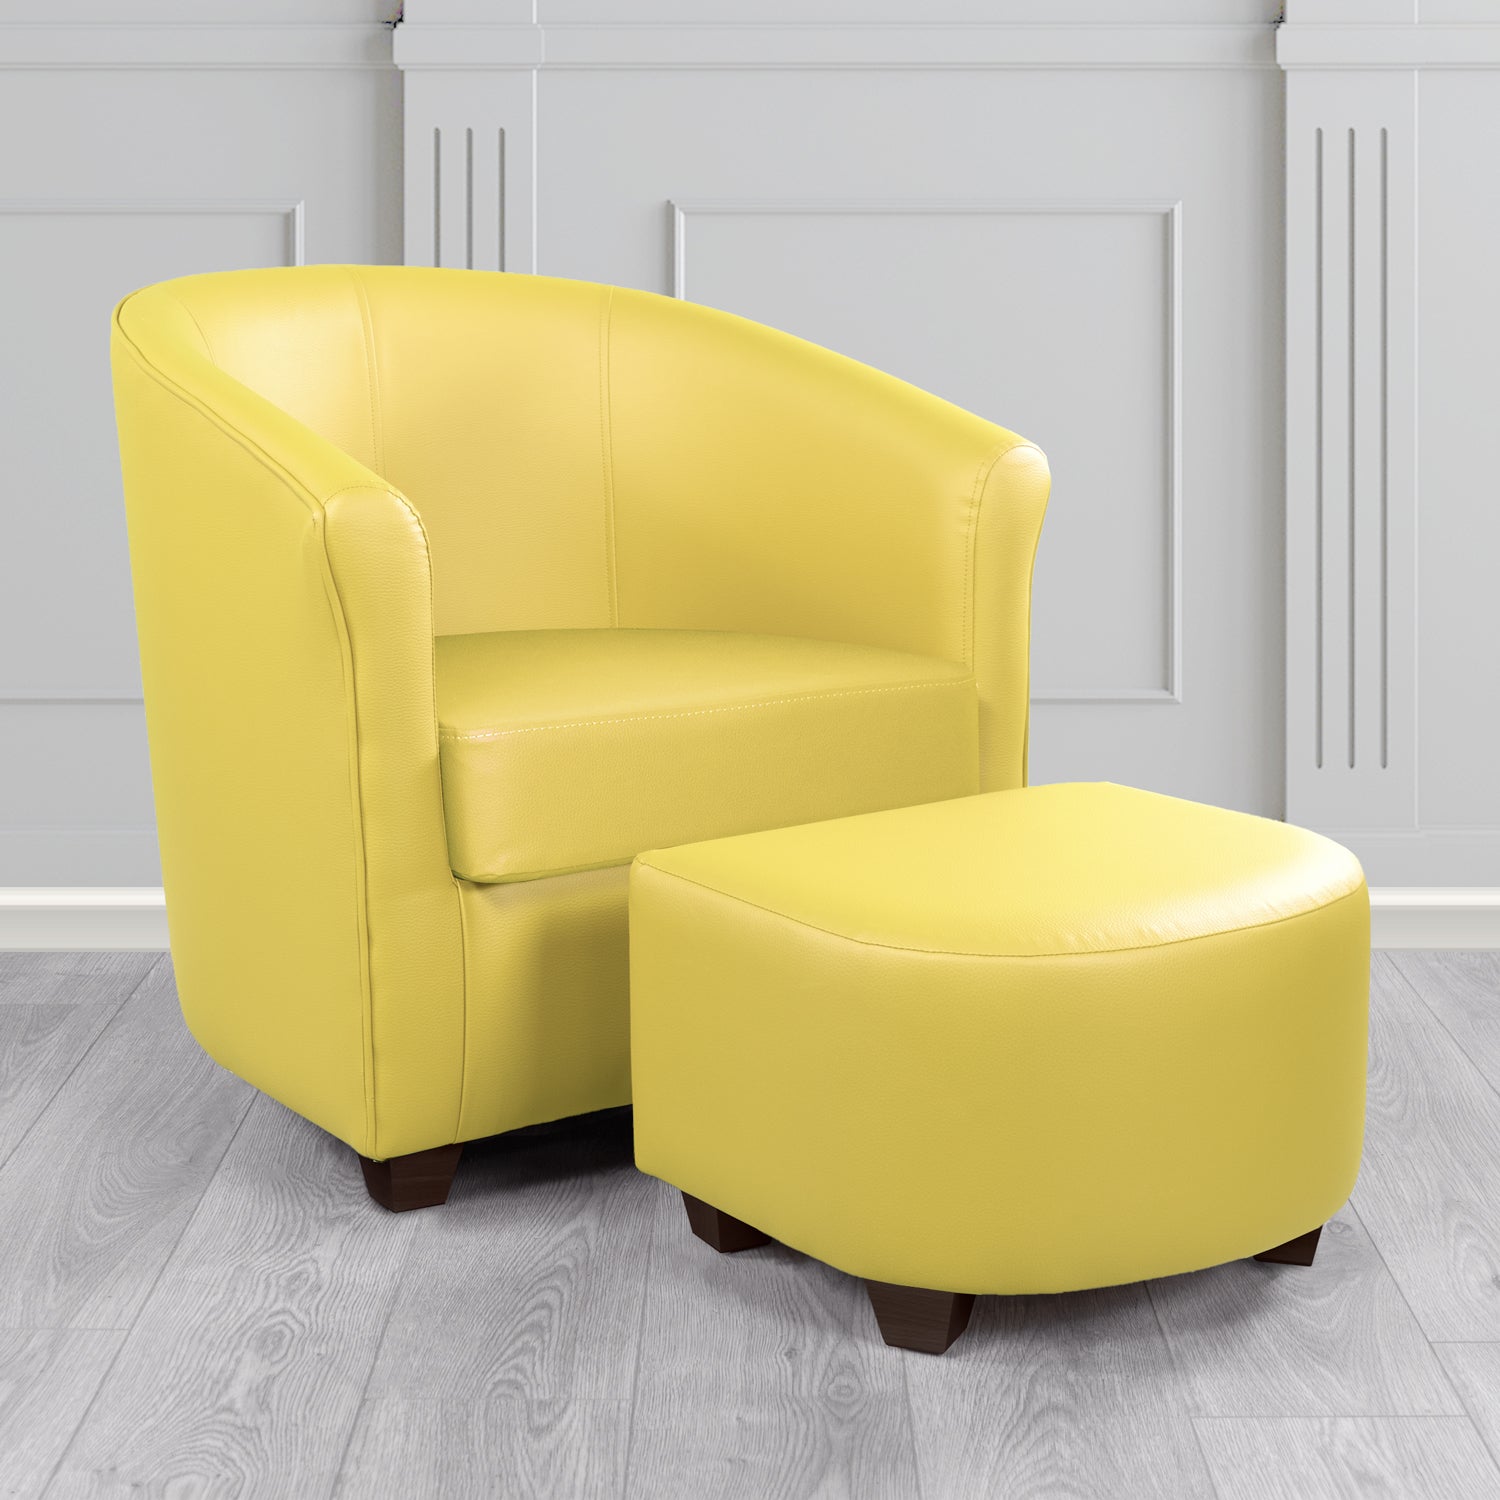 Cannes Tub Chair with Footstool Set in Just Colour Primrose Crib 5 Faux Leather - The Tub Chair Shop